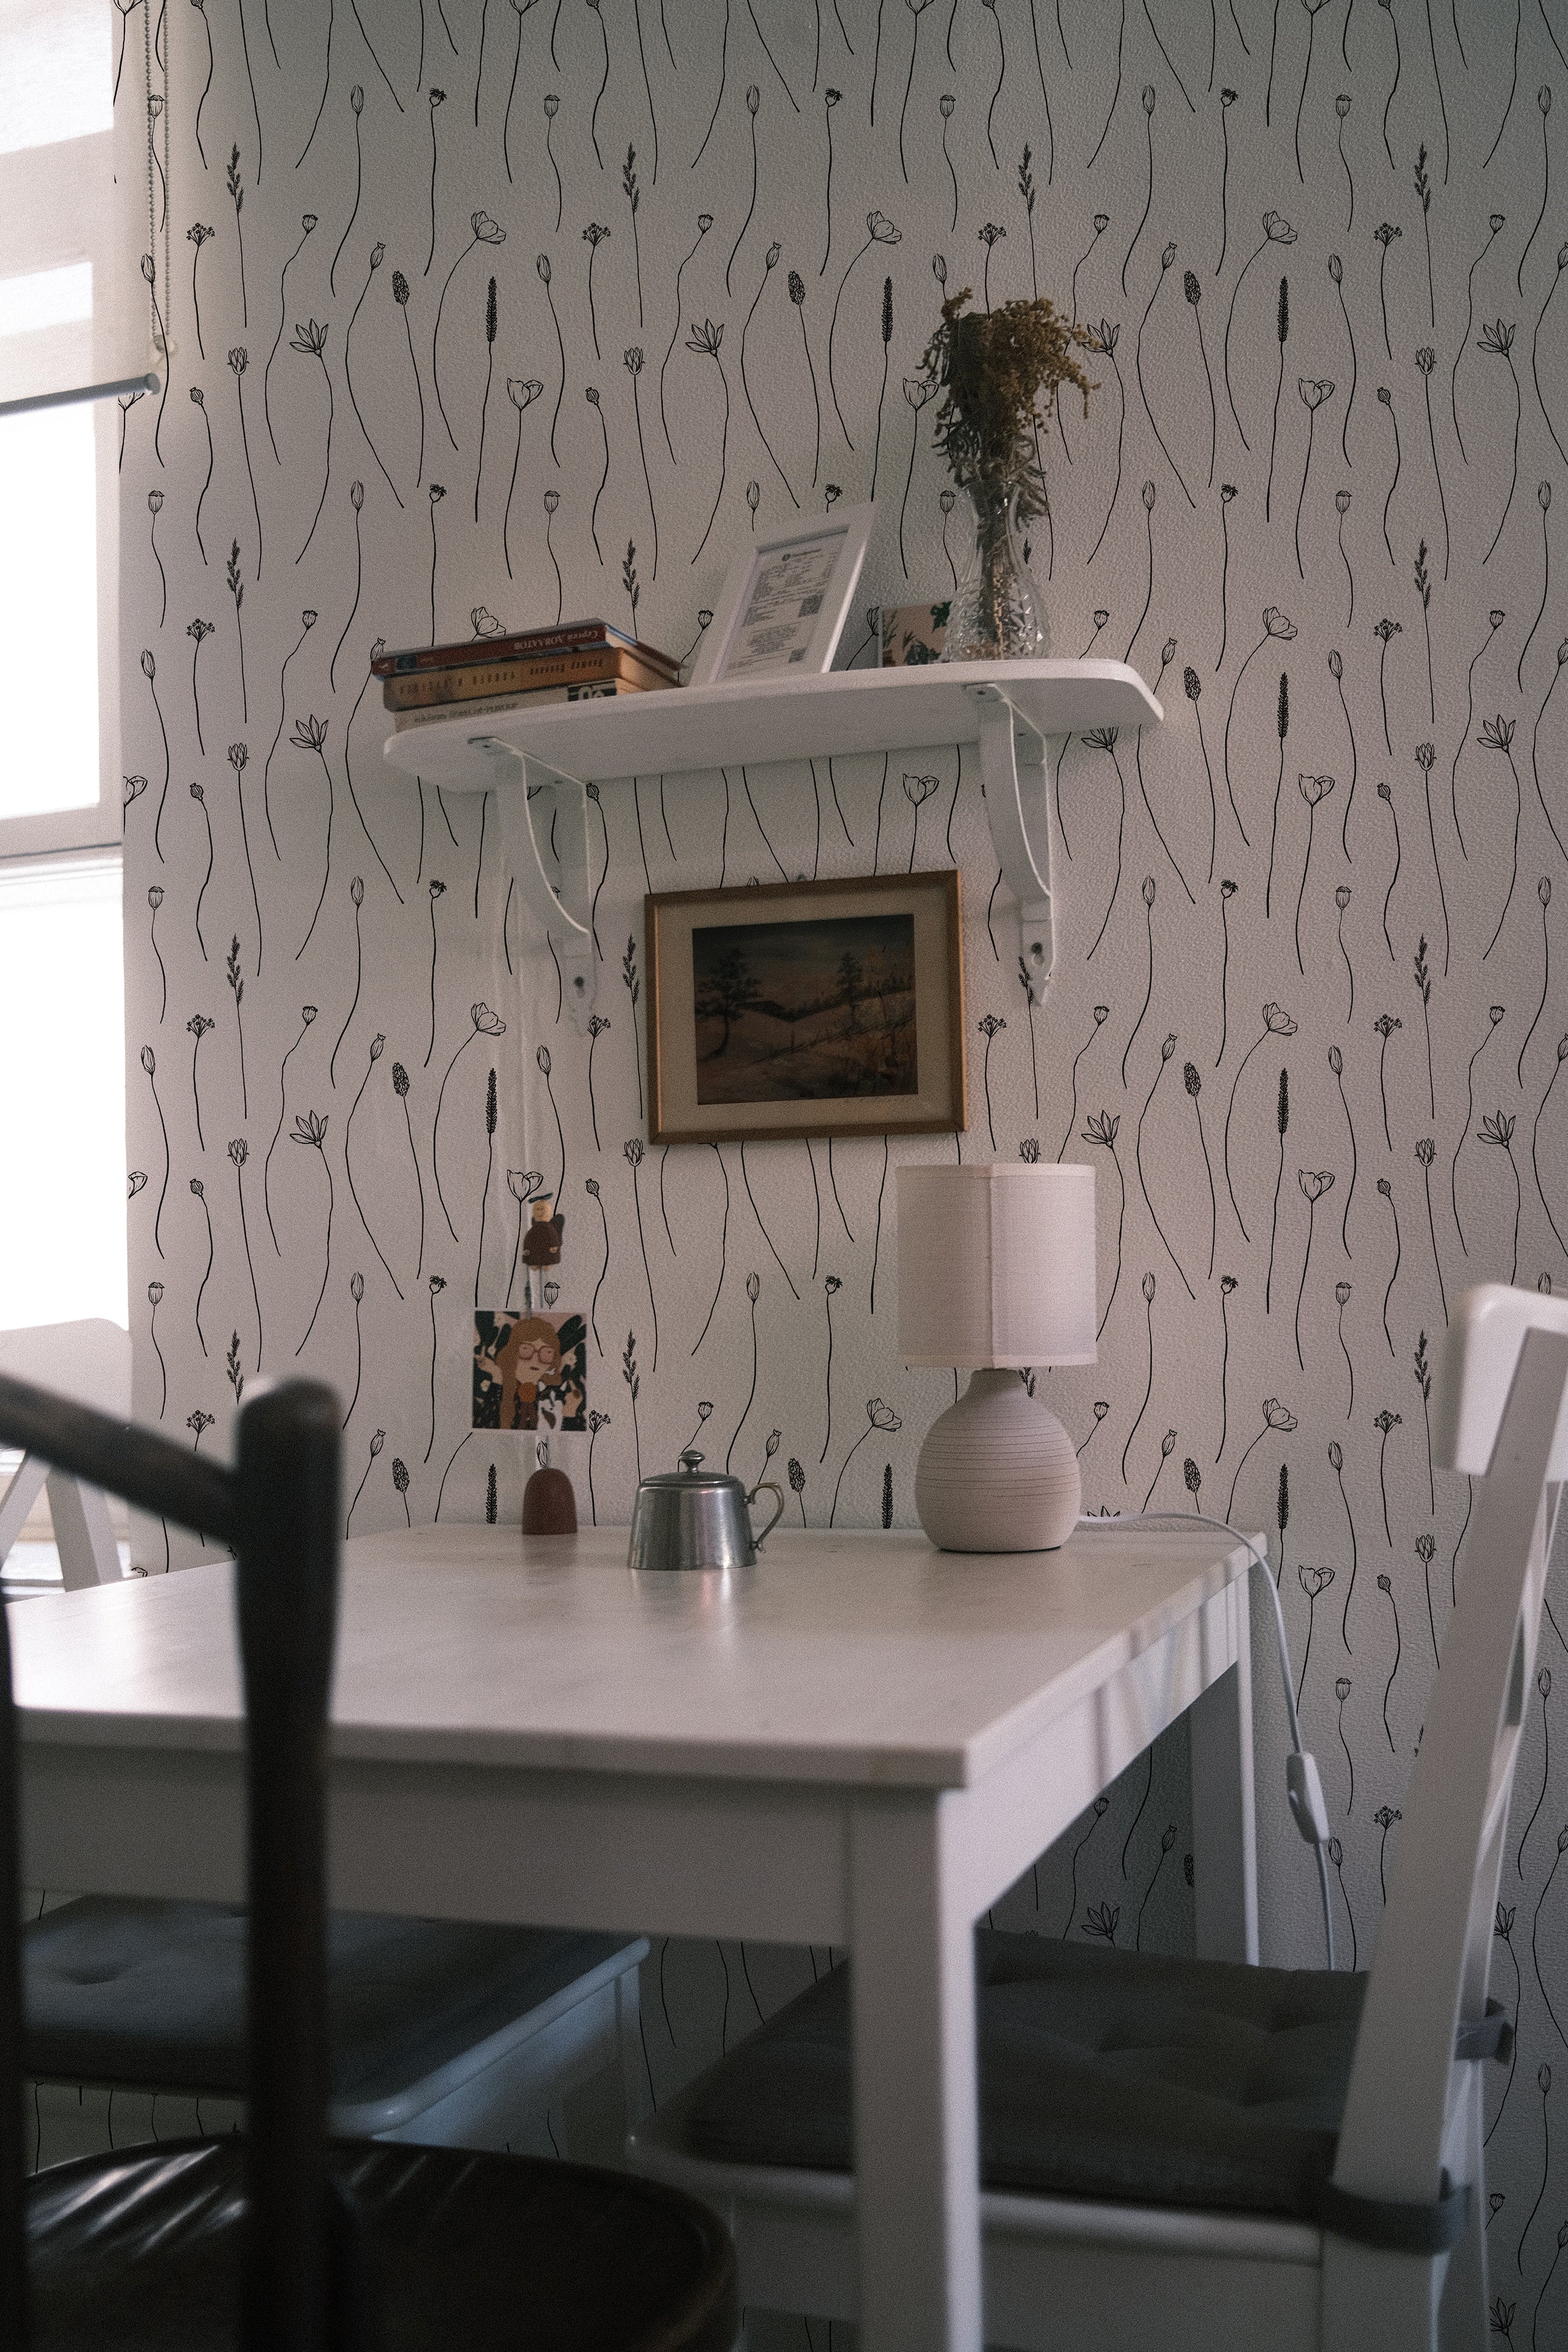 A cozy dining area enhanced with the 'Wildflower Sketch Wallpaper' featuring a simple black and white line art of wildflowers. The elegant, minimalist design complements the rustic wooden dining table and chairs, creating a tranquil and inviting atmosphere.